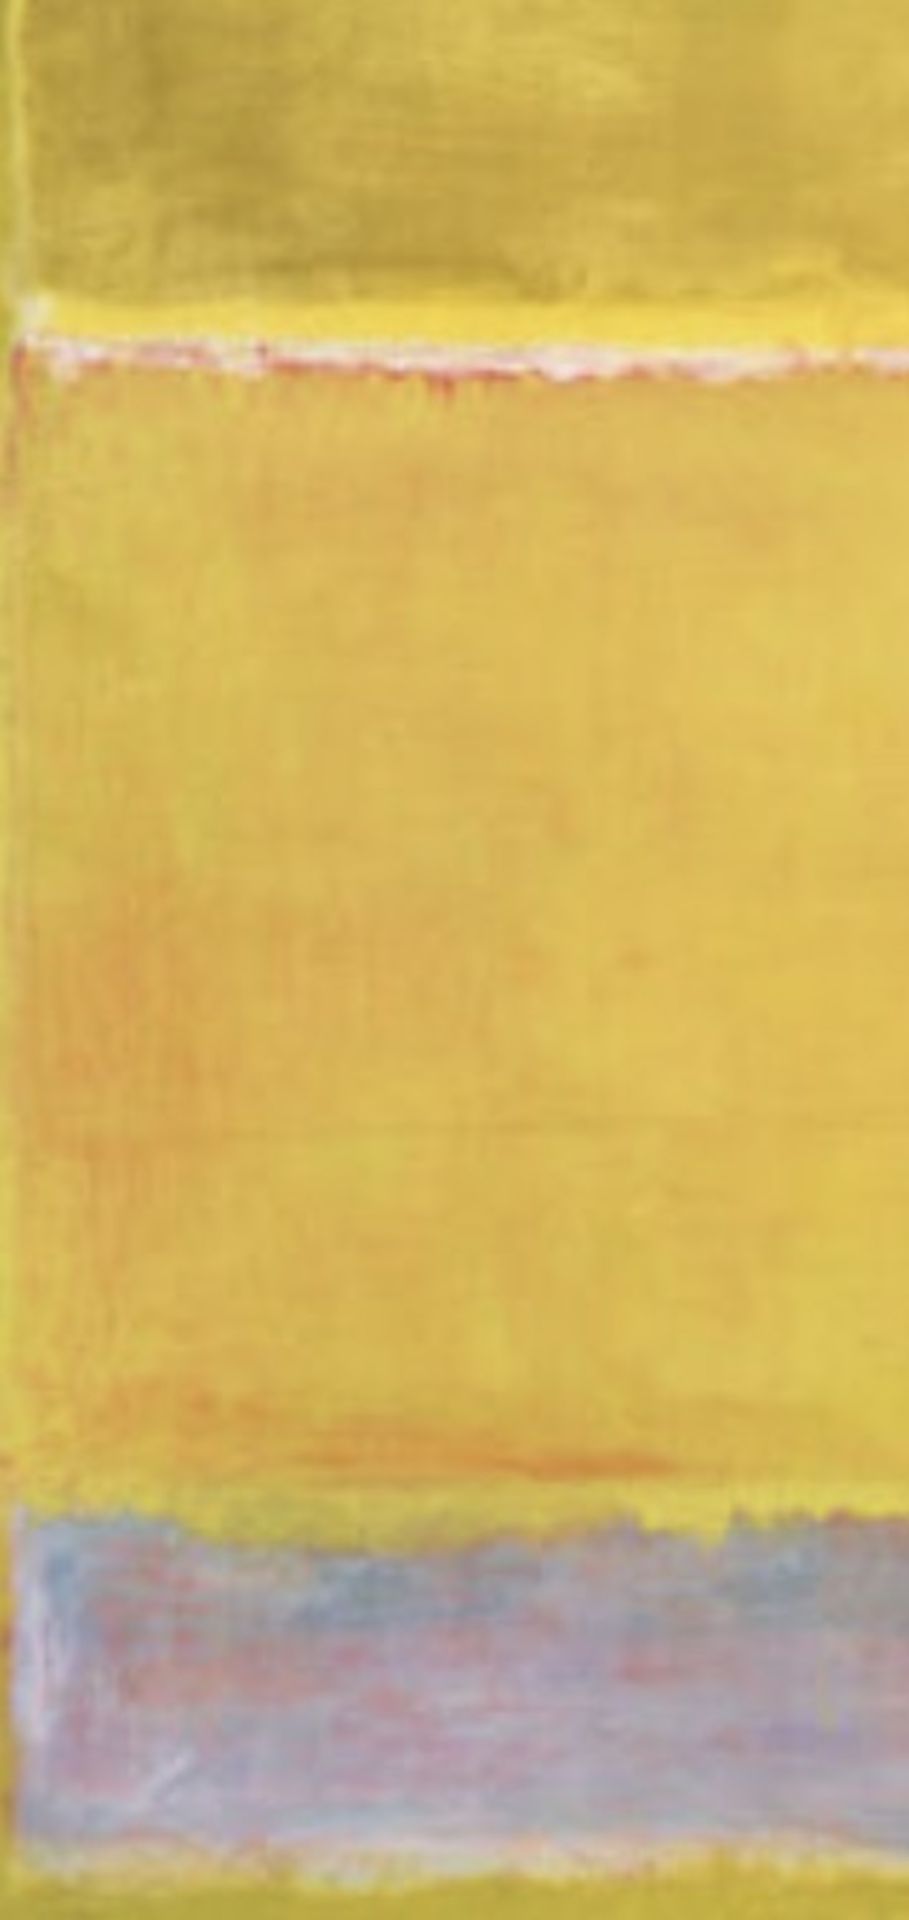 Mark Rothko "Yellow" Offset Lithograph - Image 4 of 5